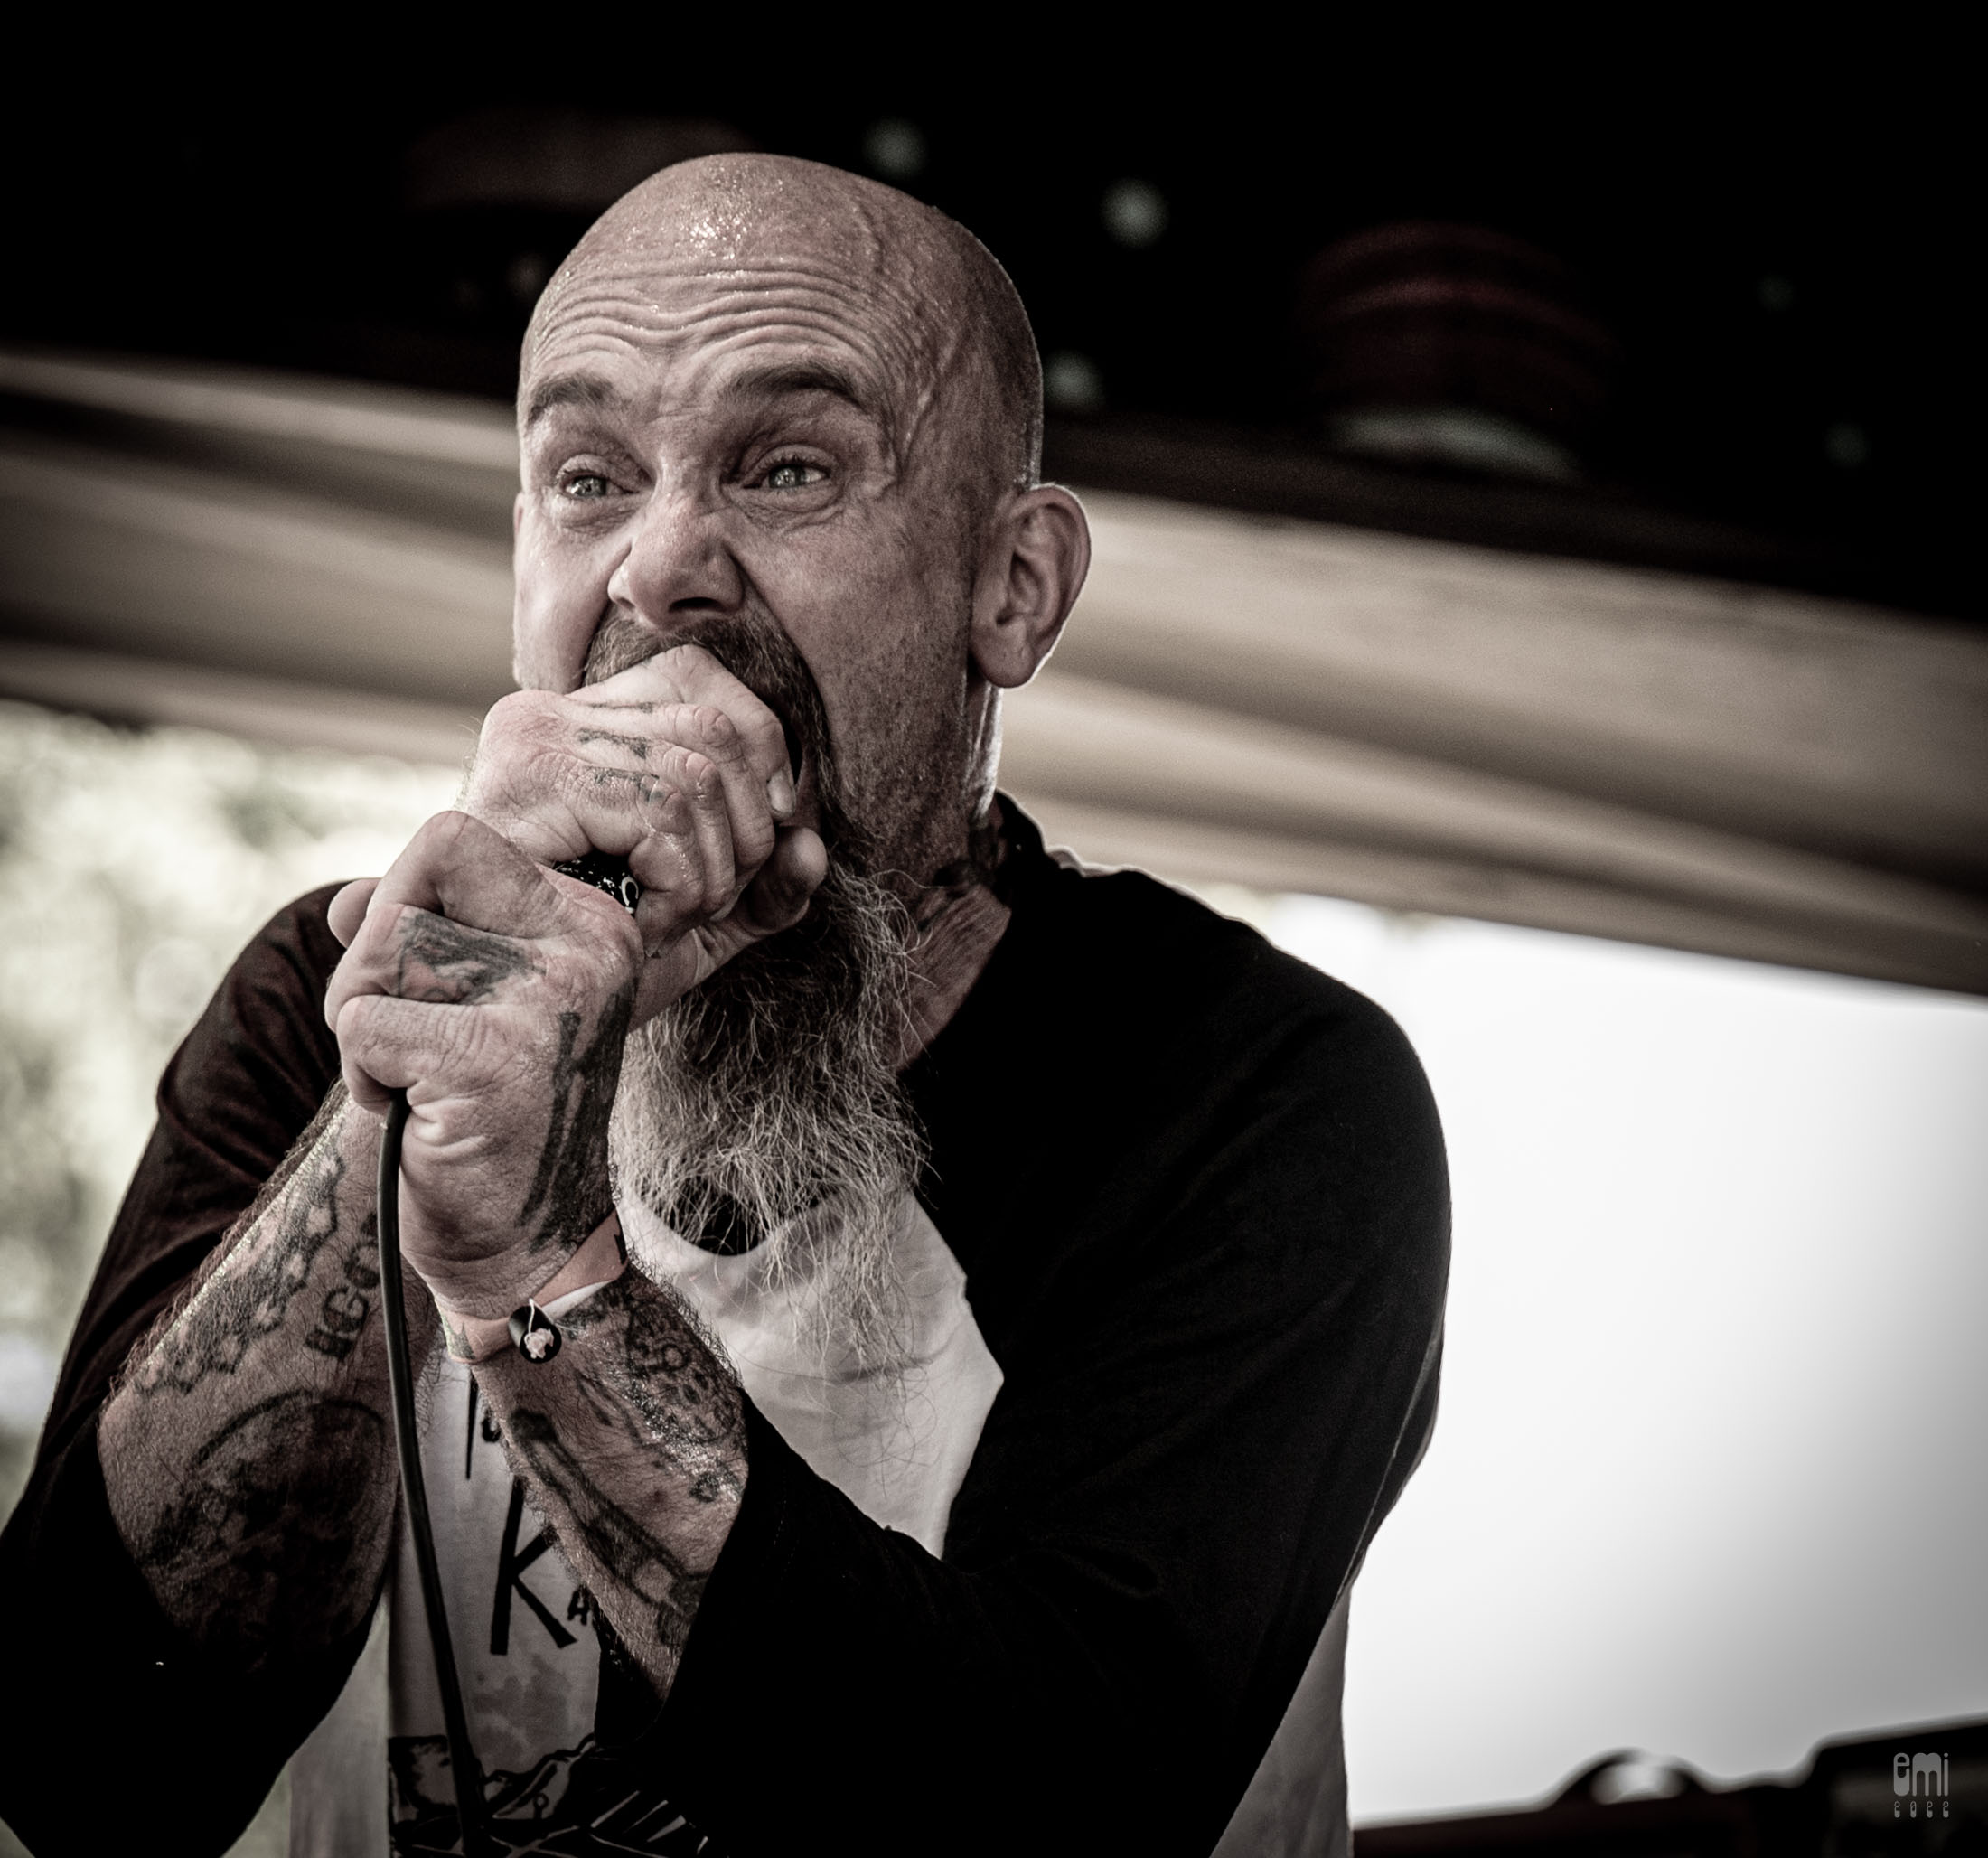 20220723 Nick Oliveri at RippleFest Texas 2022, The Far Out Lounge, Austin TX. photo by emi